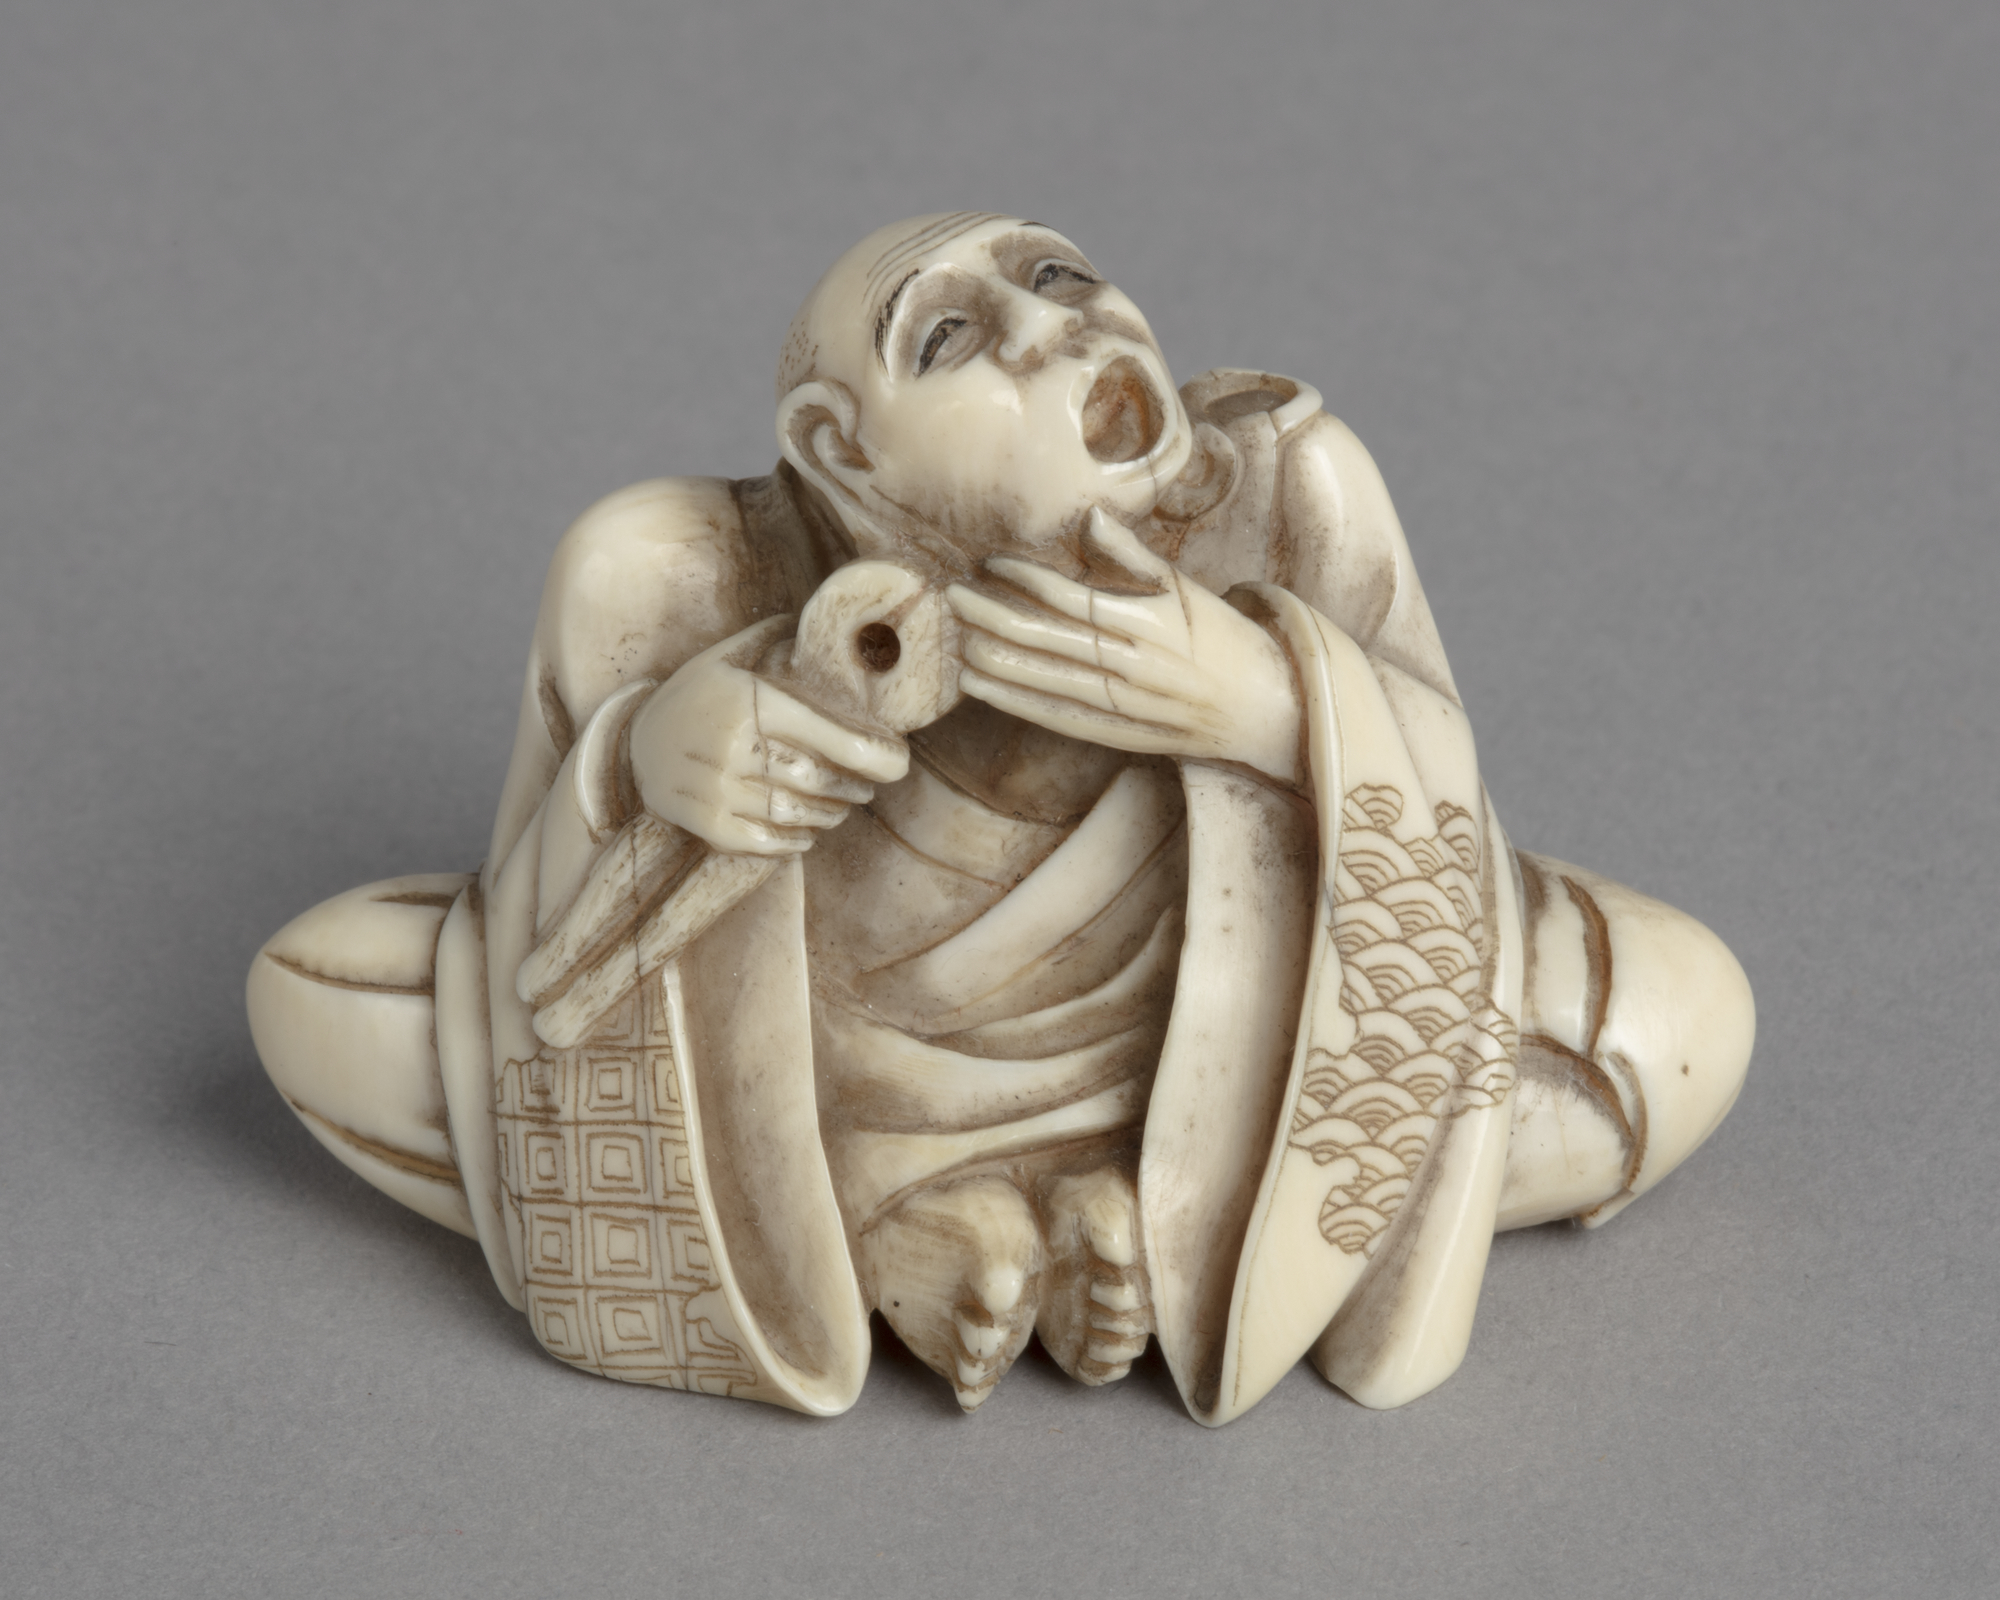 A Japanese ivory netsuke of a man in robes seated with feet together holding pliers to his mouth.